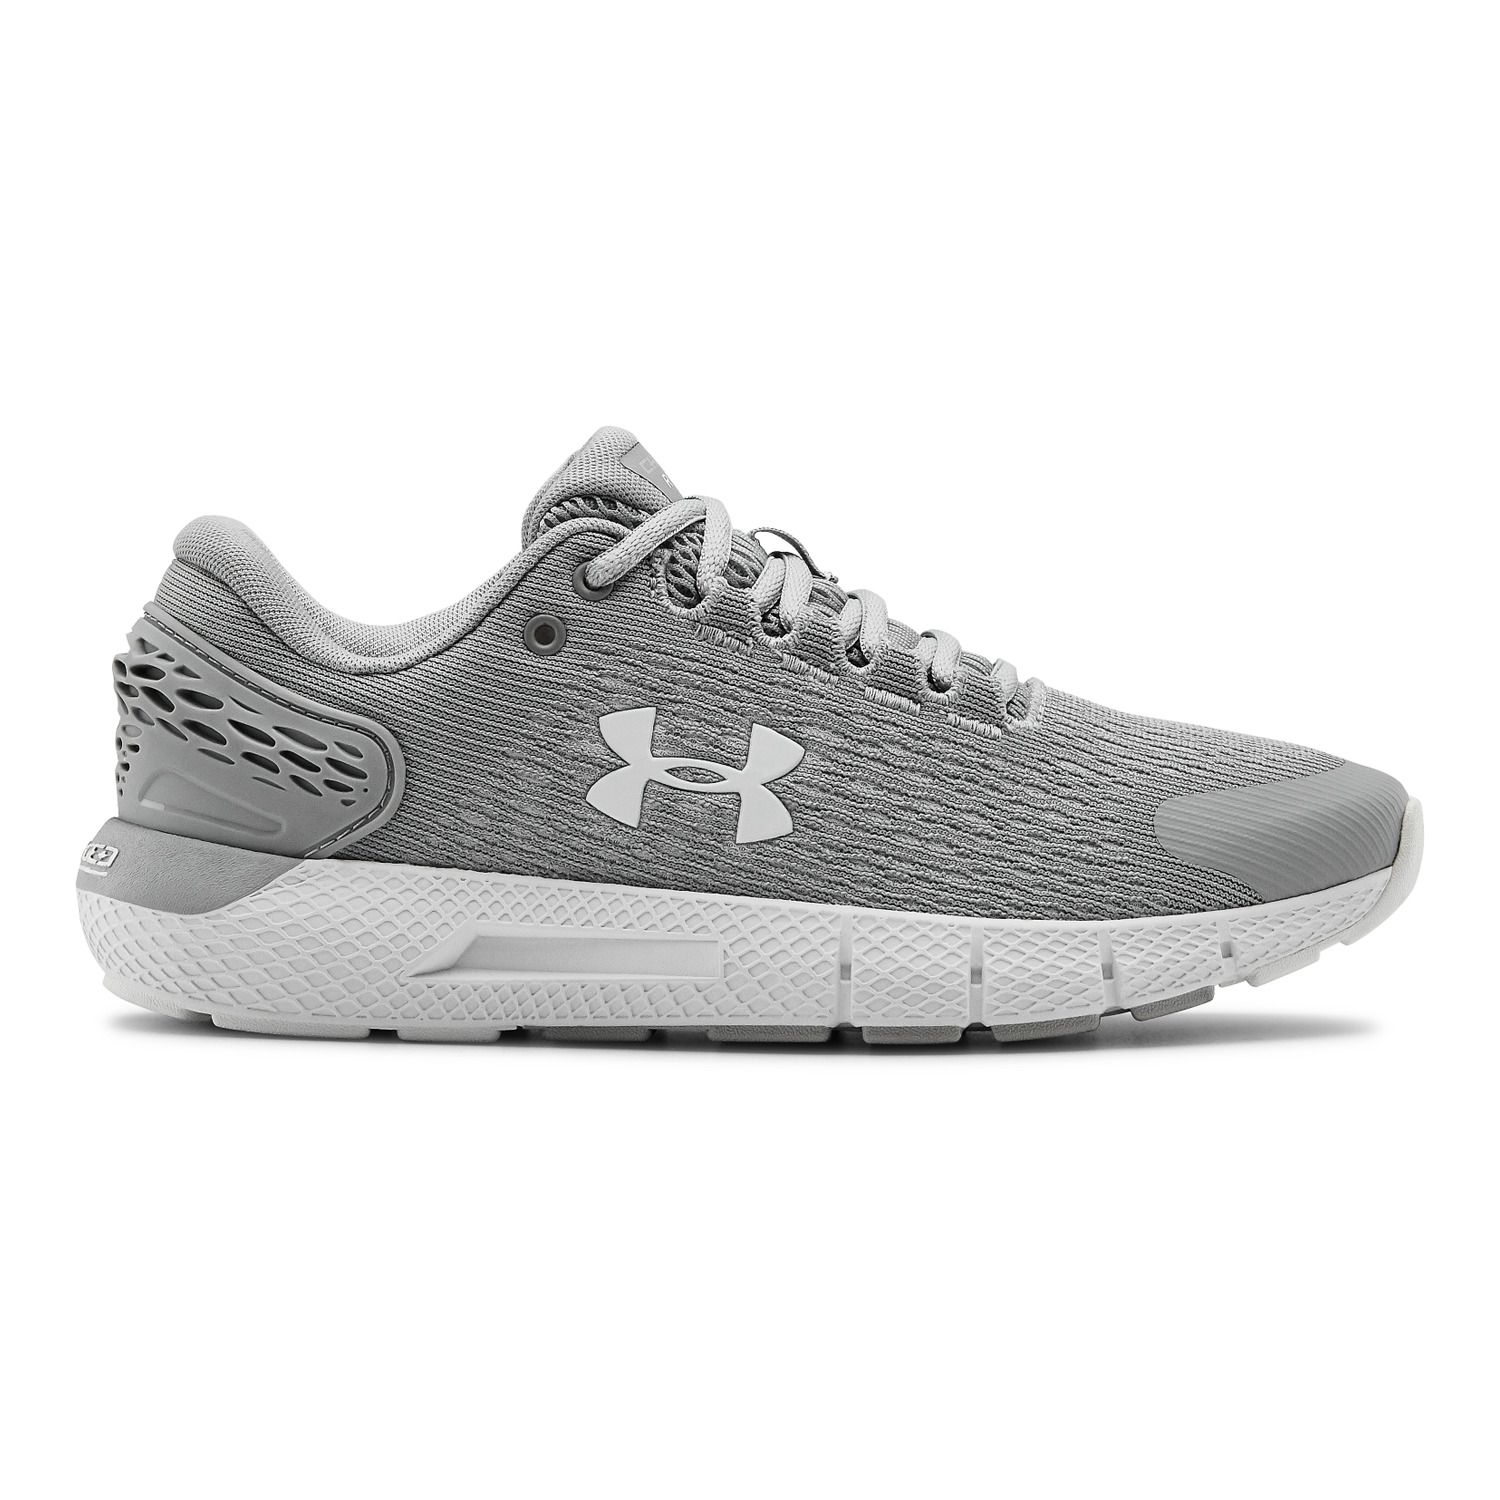 Under Armour Charged Rogue 2 Women's 